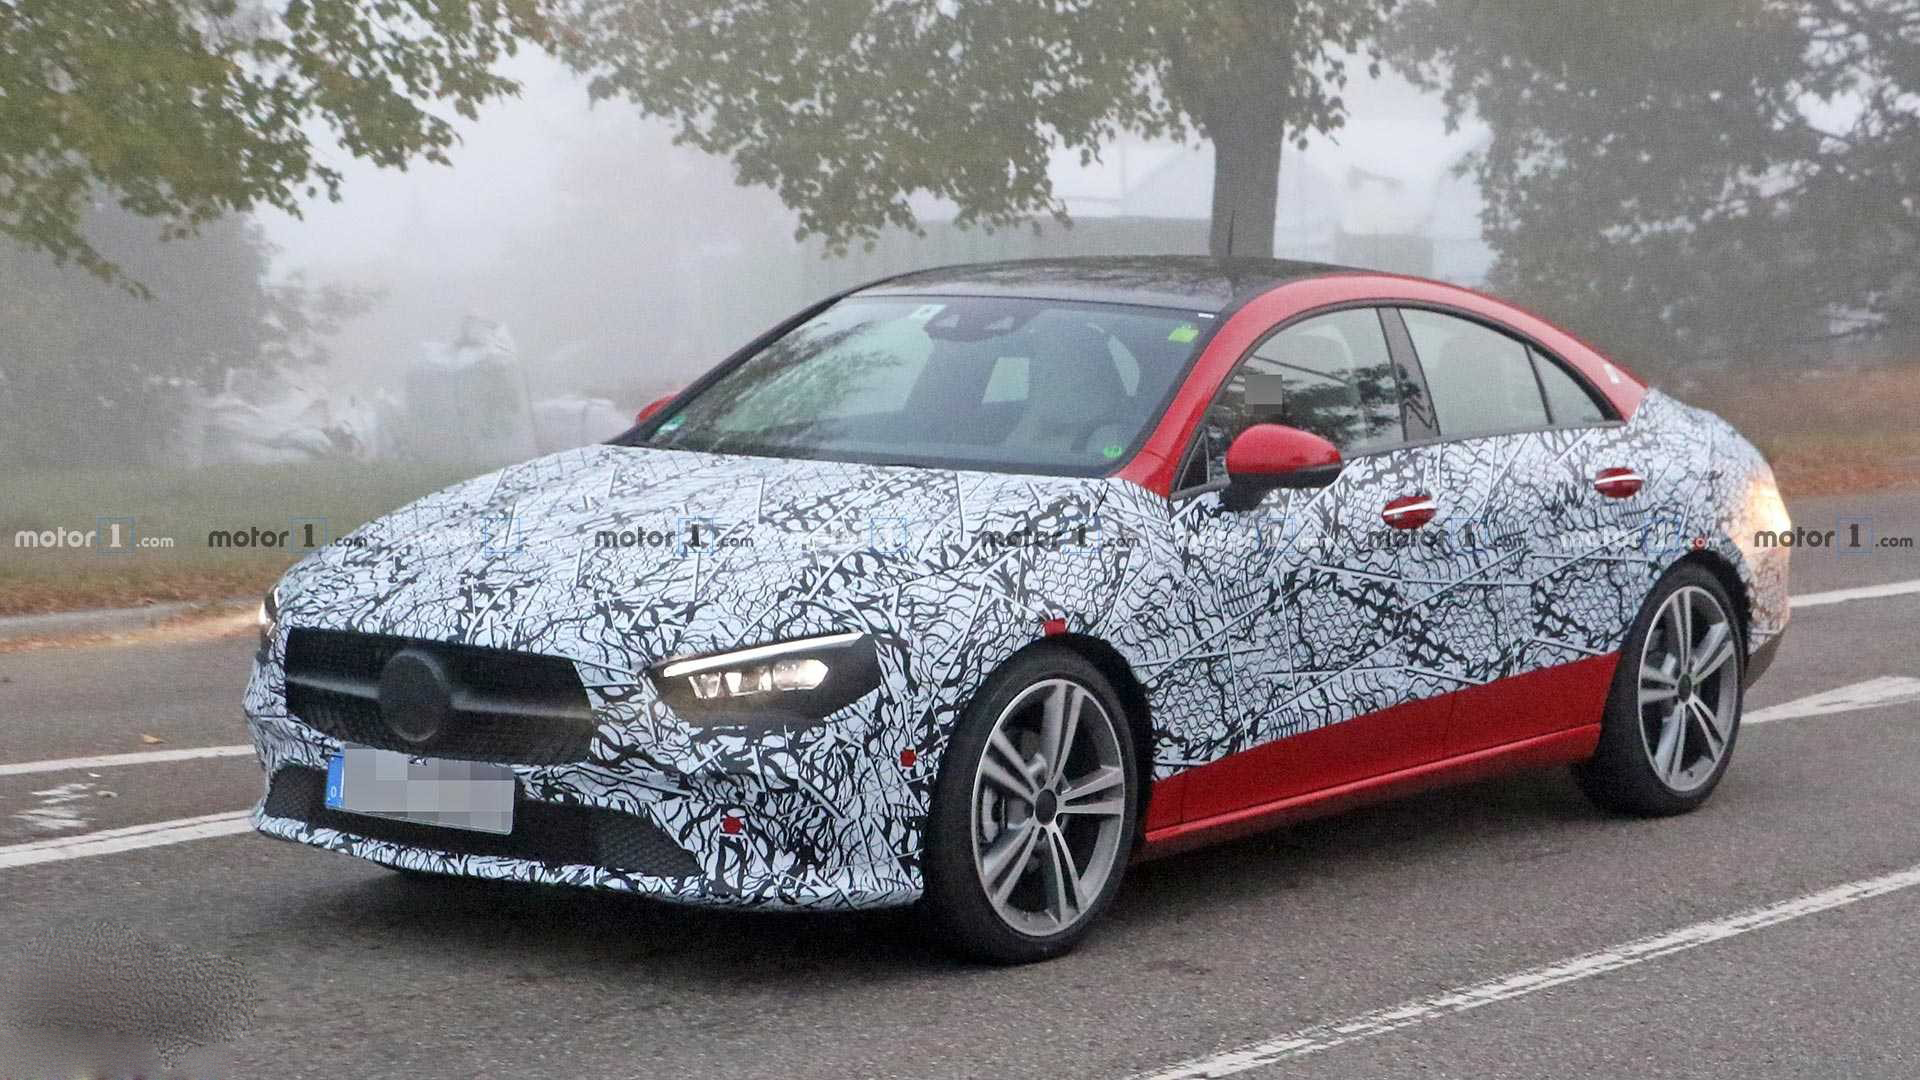 Mercedes CLA 2020 appears during testing